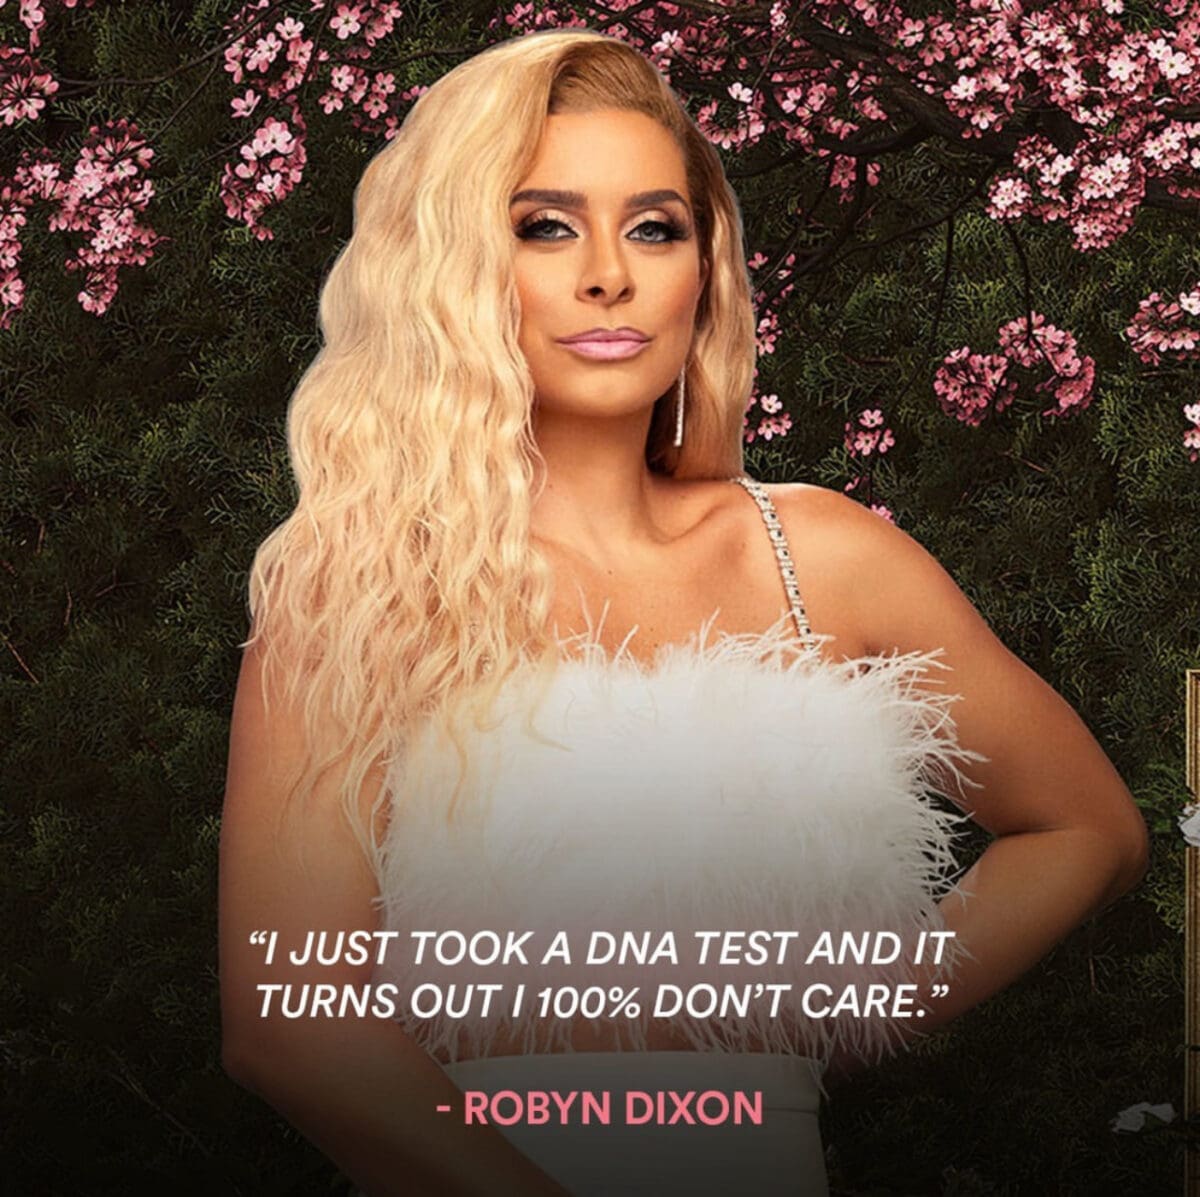 Robyn Dixon is proving she's 100% that b--ch.